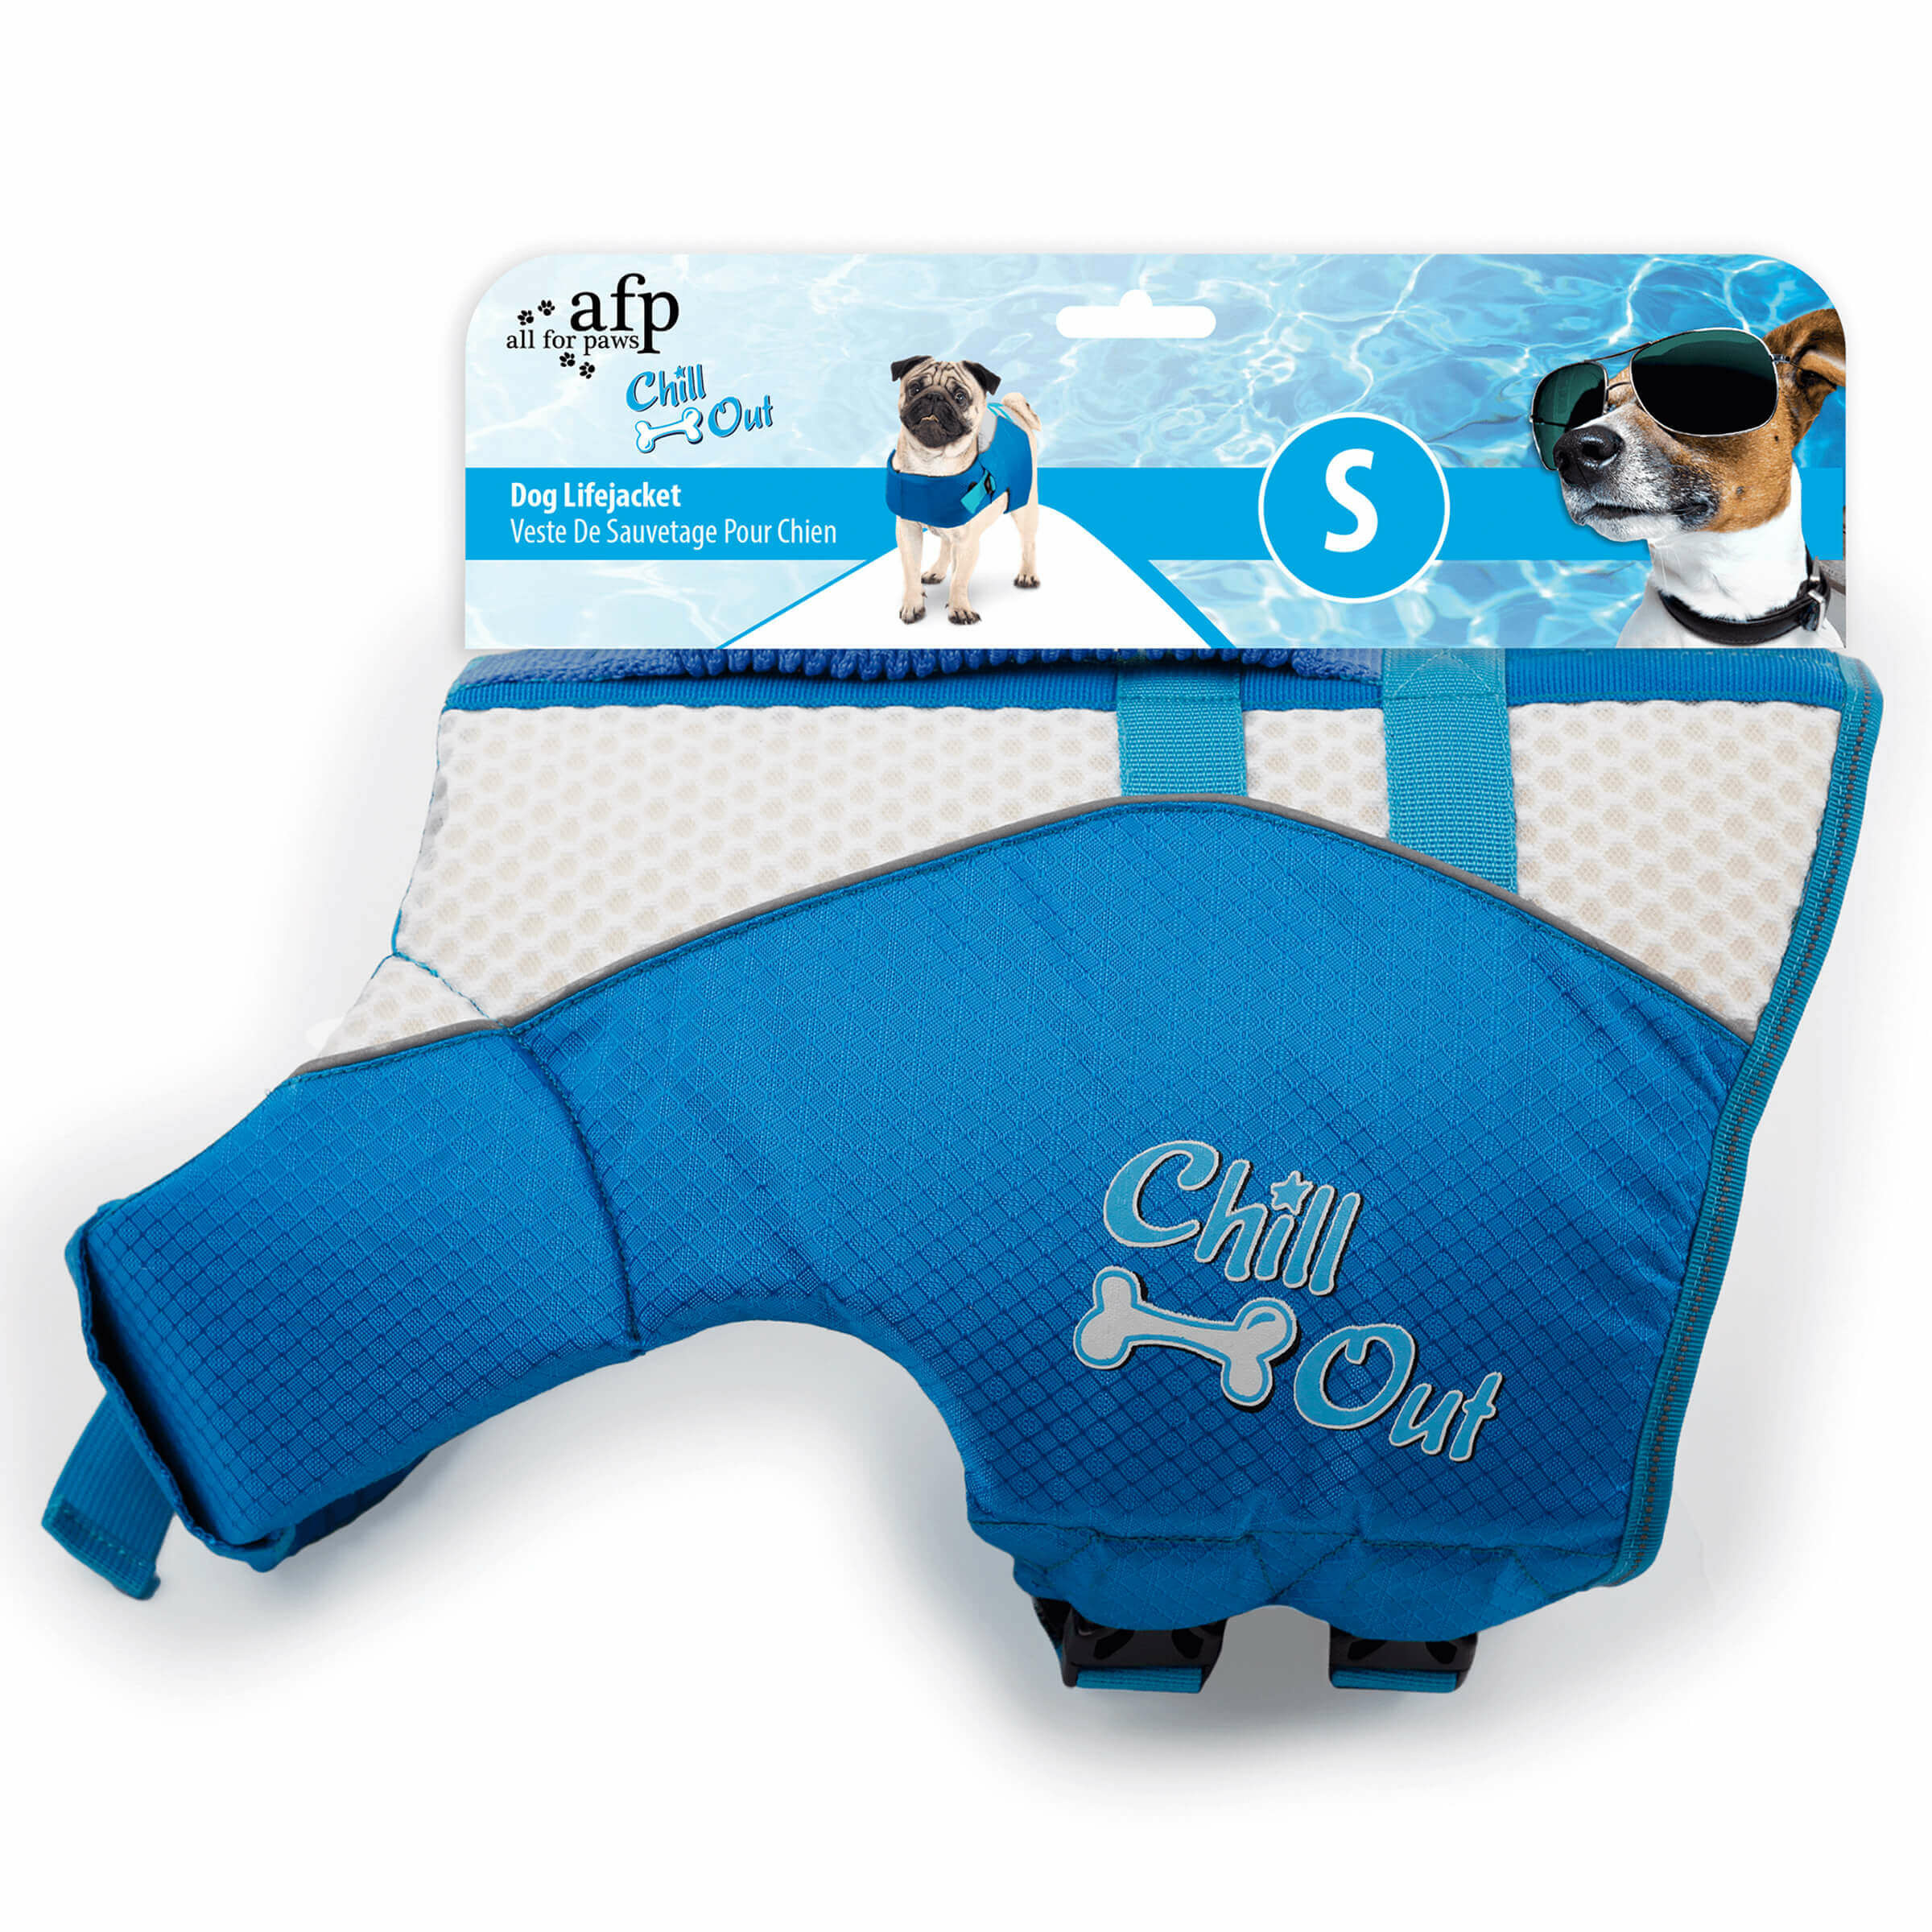 All for Paws AFP Chill Out Schwimmweste Hund mit Griff M 25-39kg